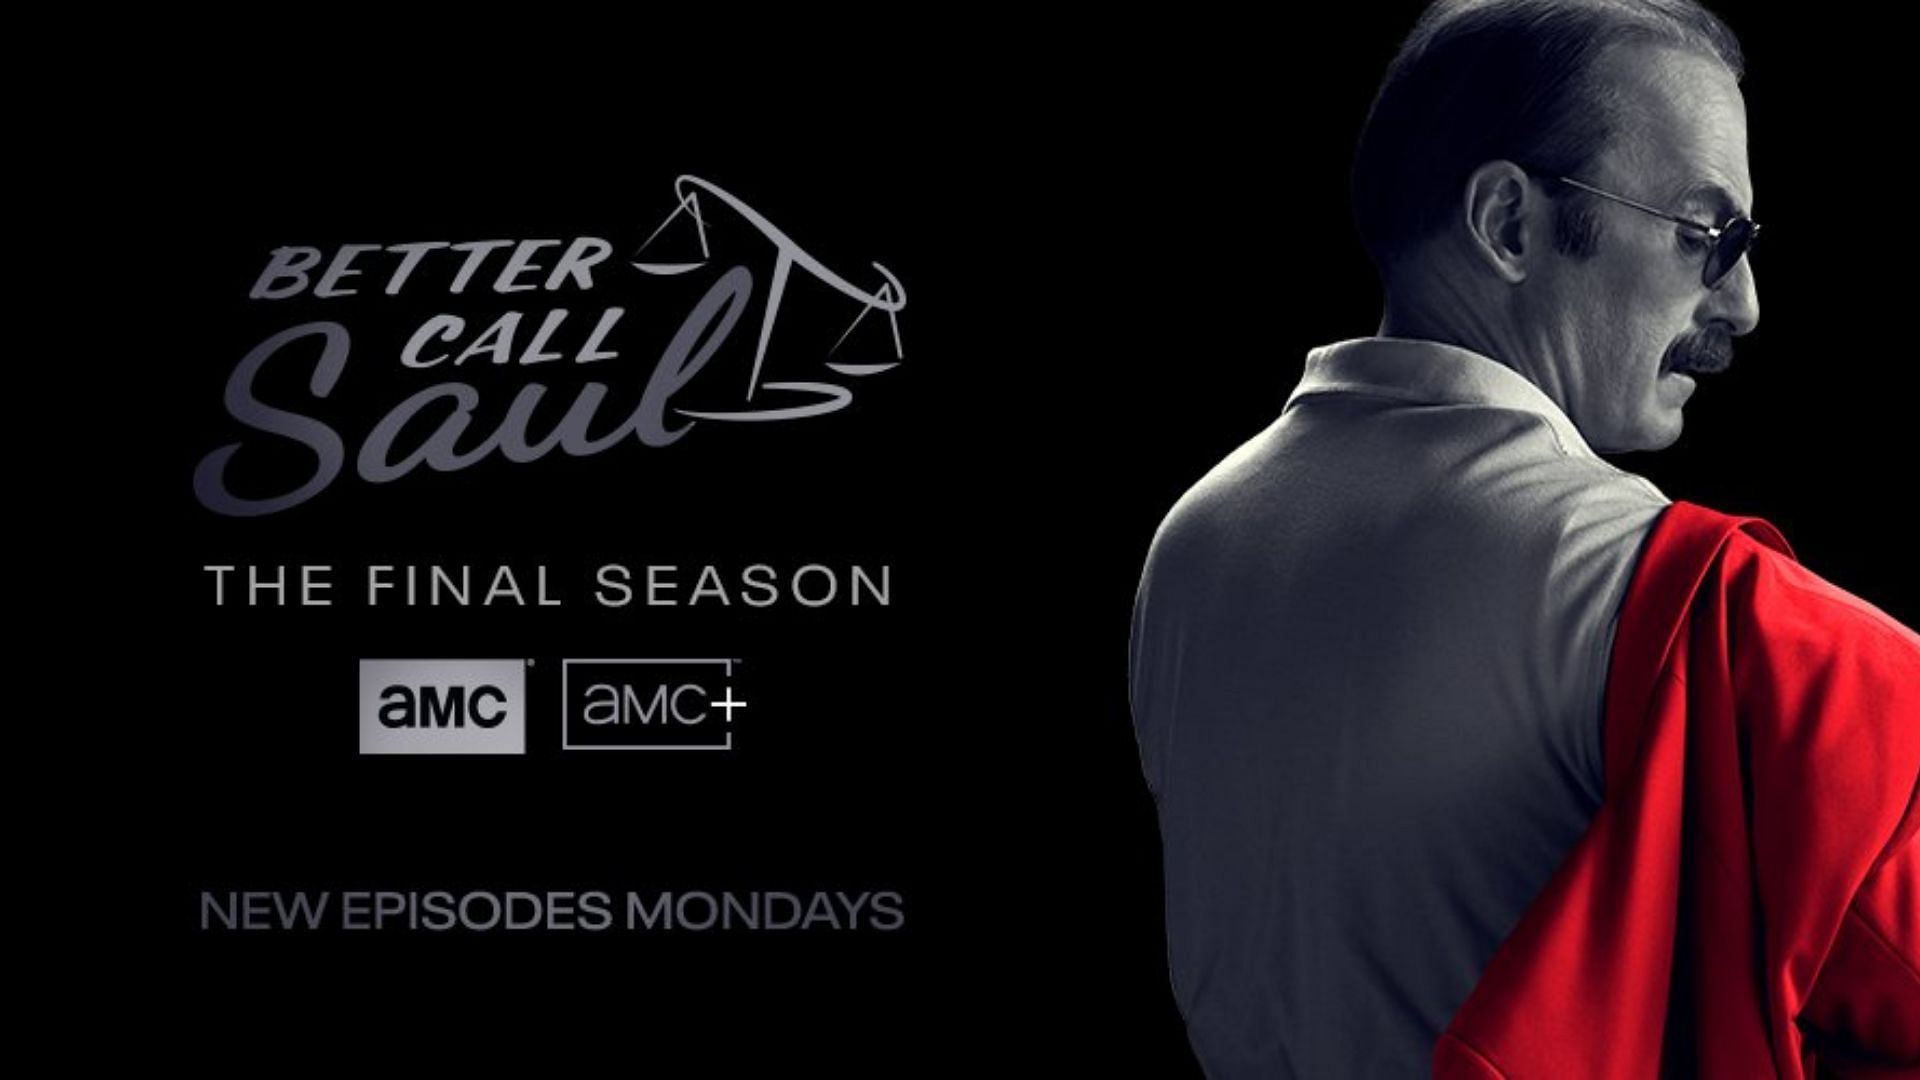 New episode of Better Call Saul arrive every Monday on AMC (Image via @BetterCallSaul/Twitter)